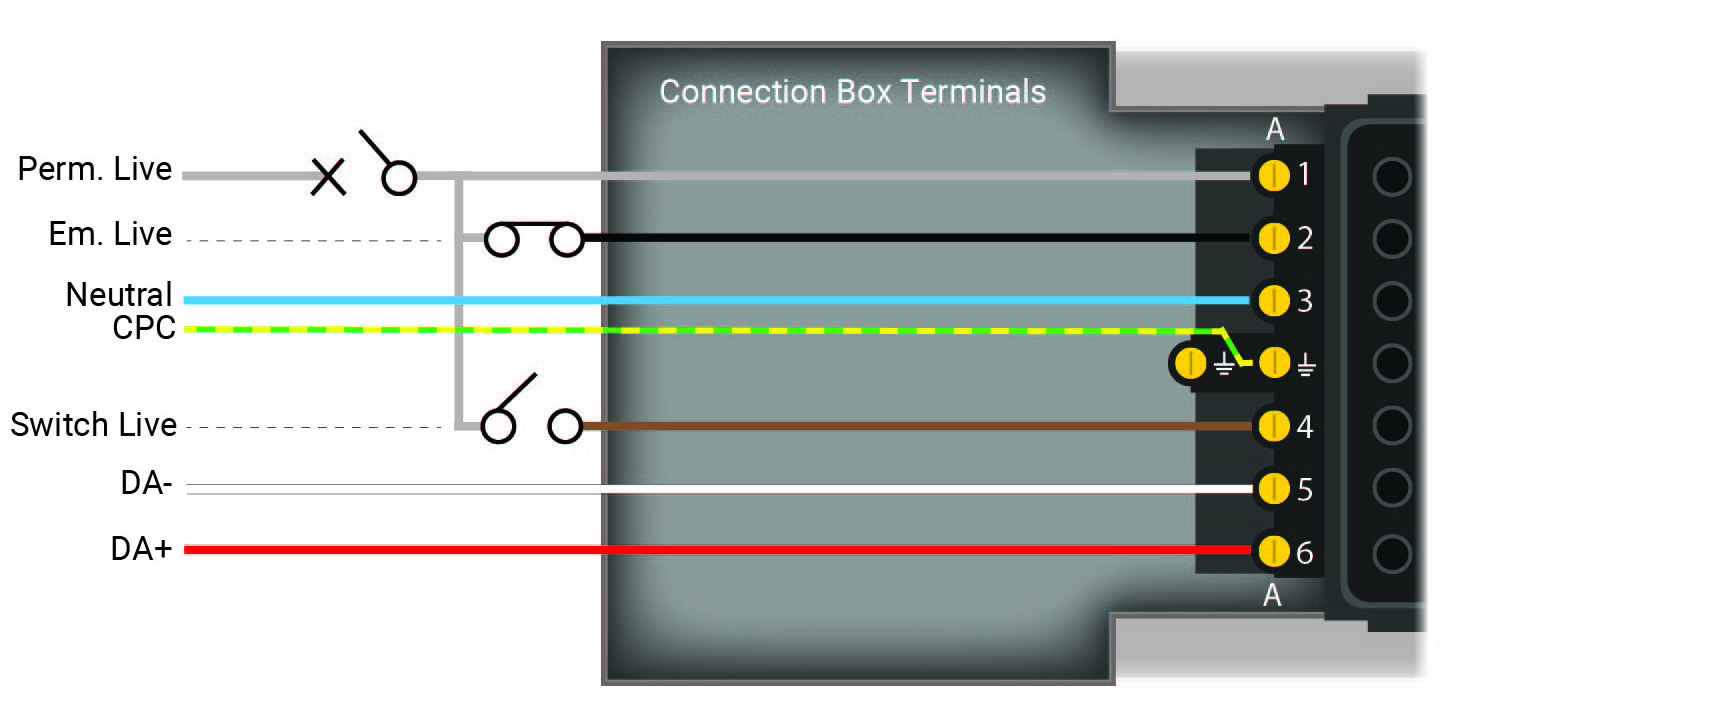 Standard flex7 wiring configuration for all 7 terminals in a Started Distribution Box